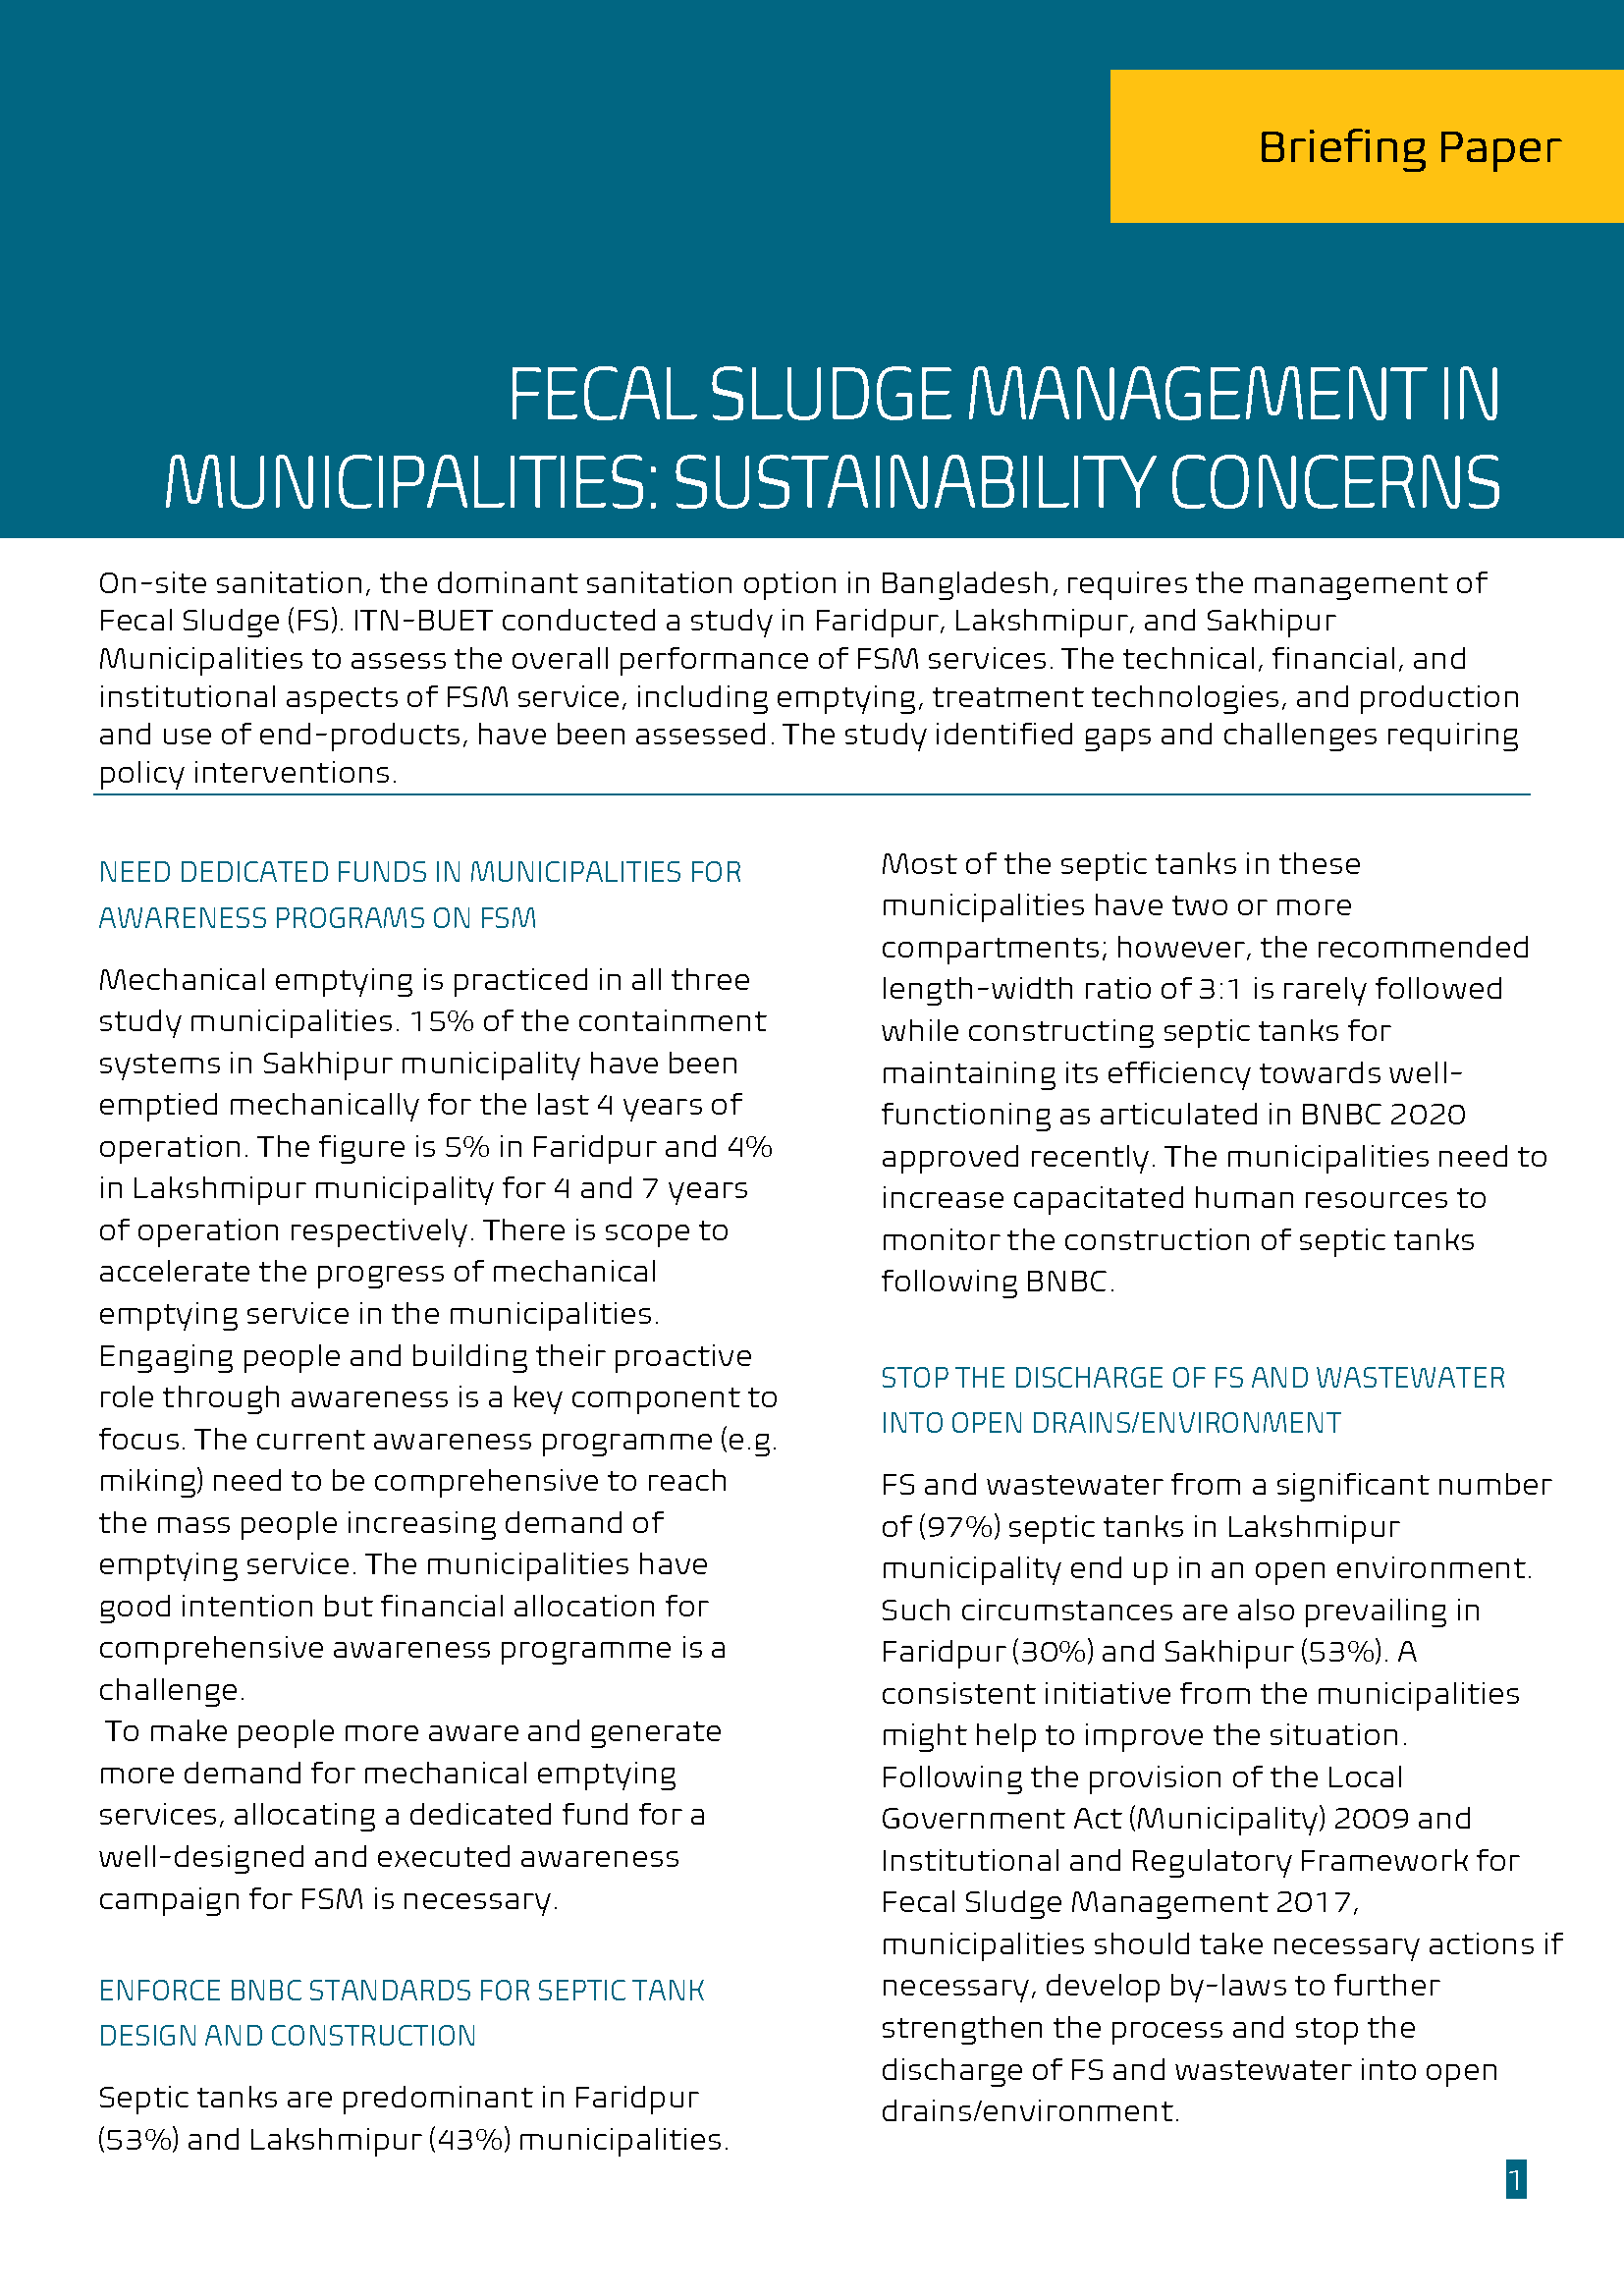 Fecal Sludge Management in Municipalities Sustainability Concerns-Briefing Paper